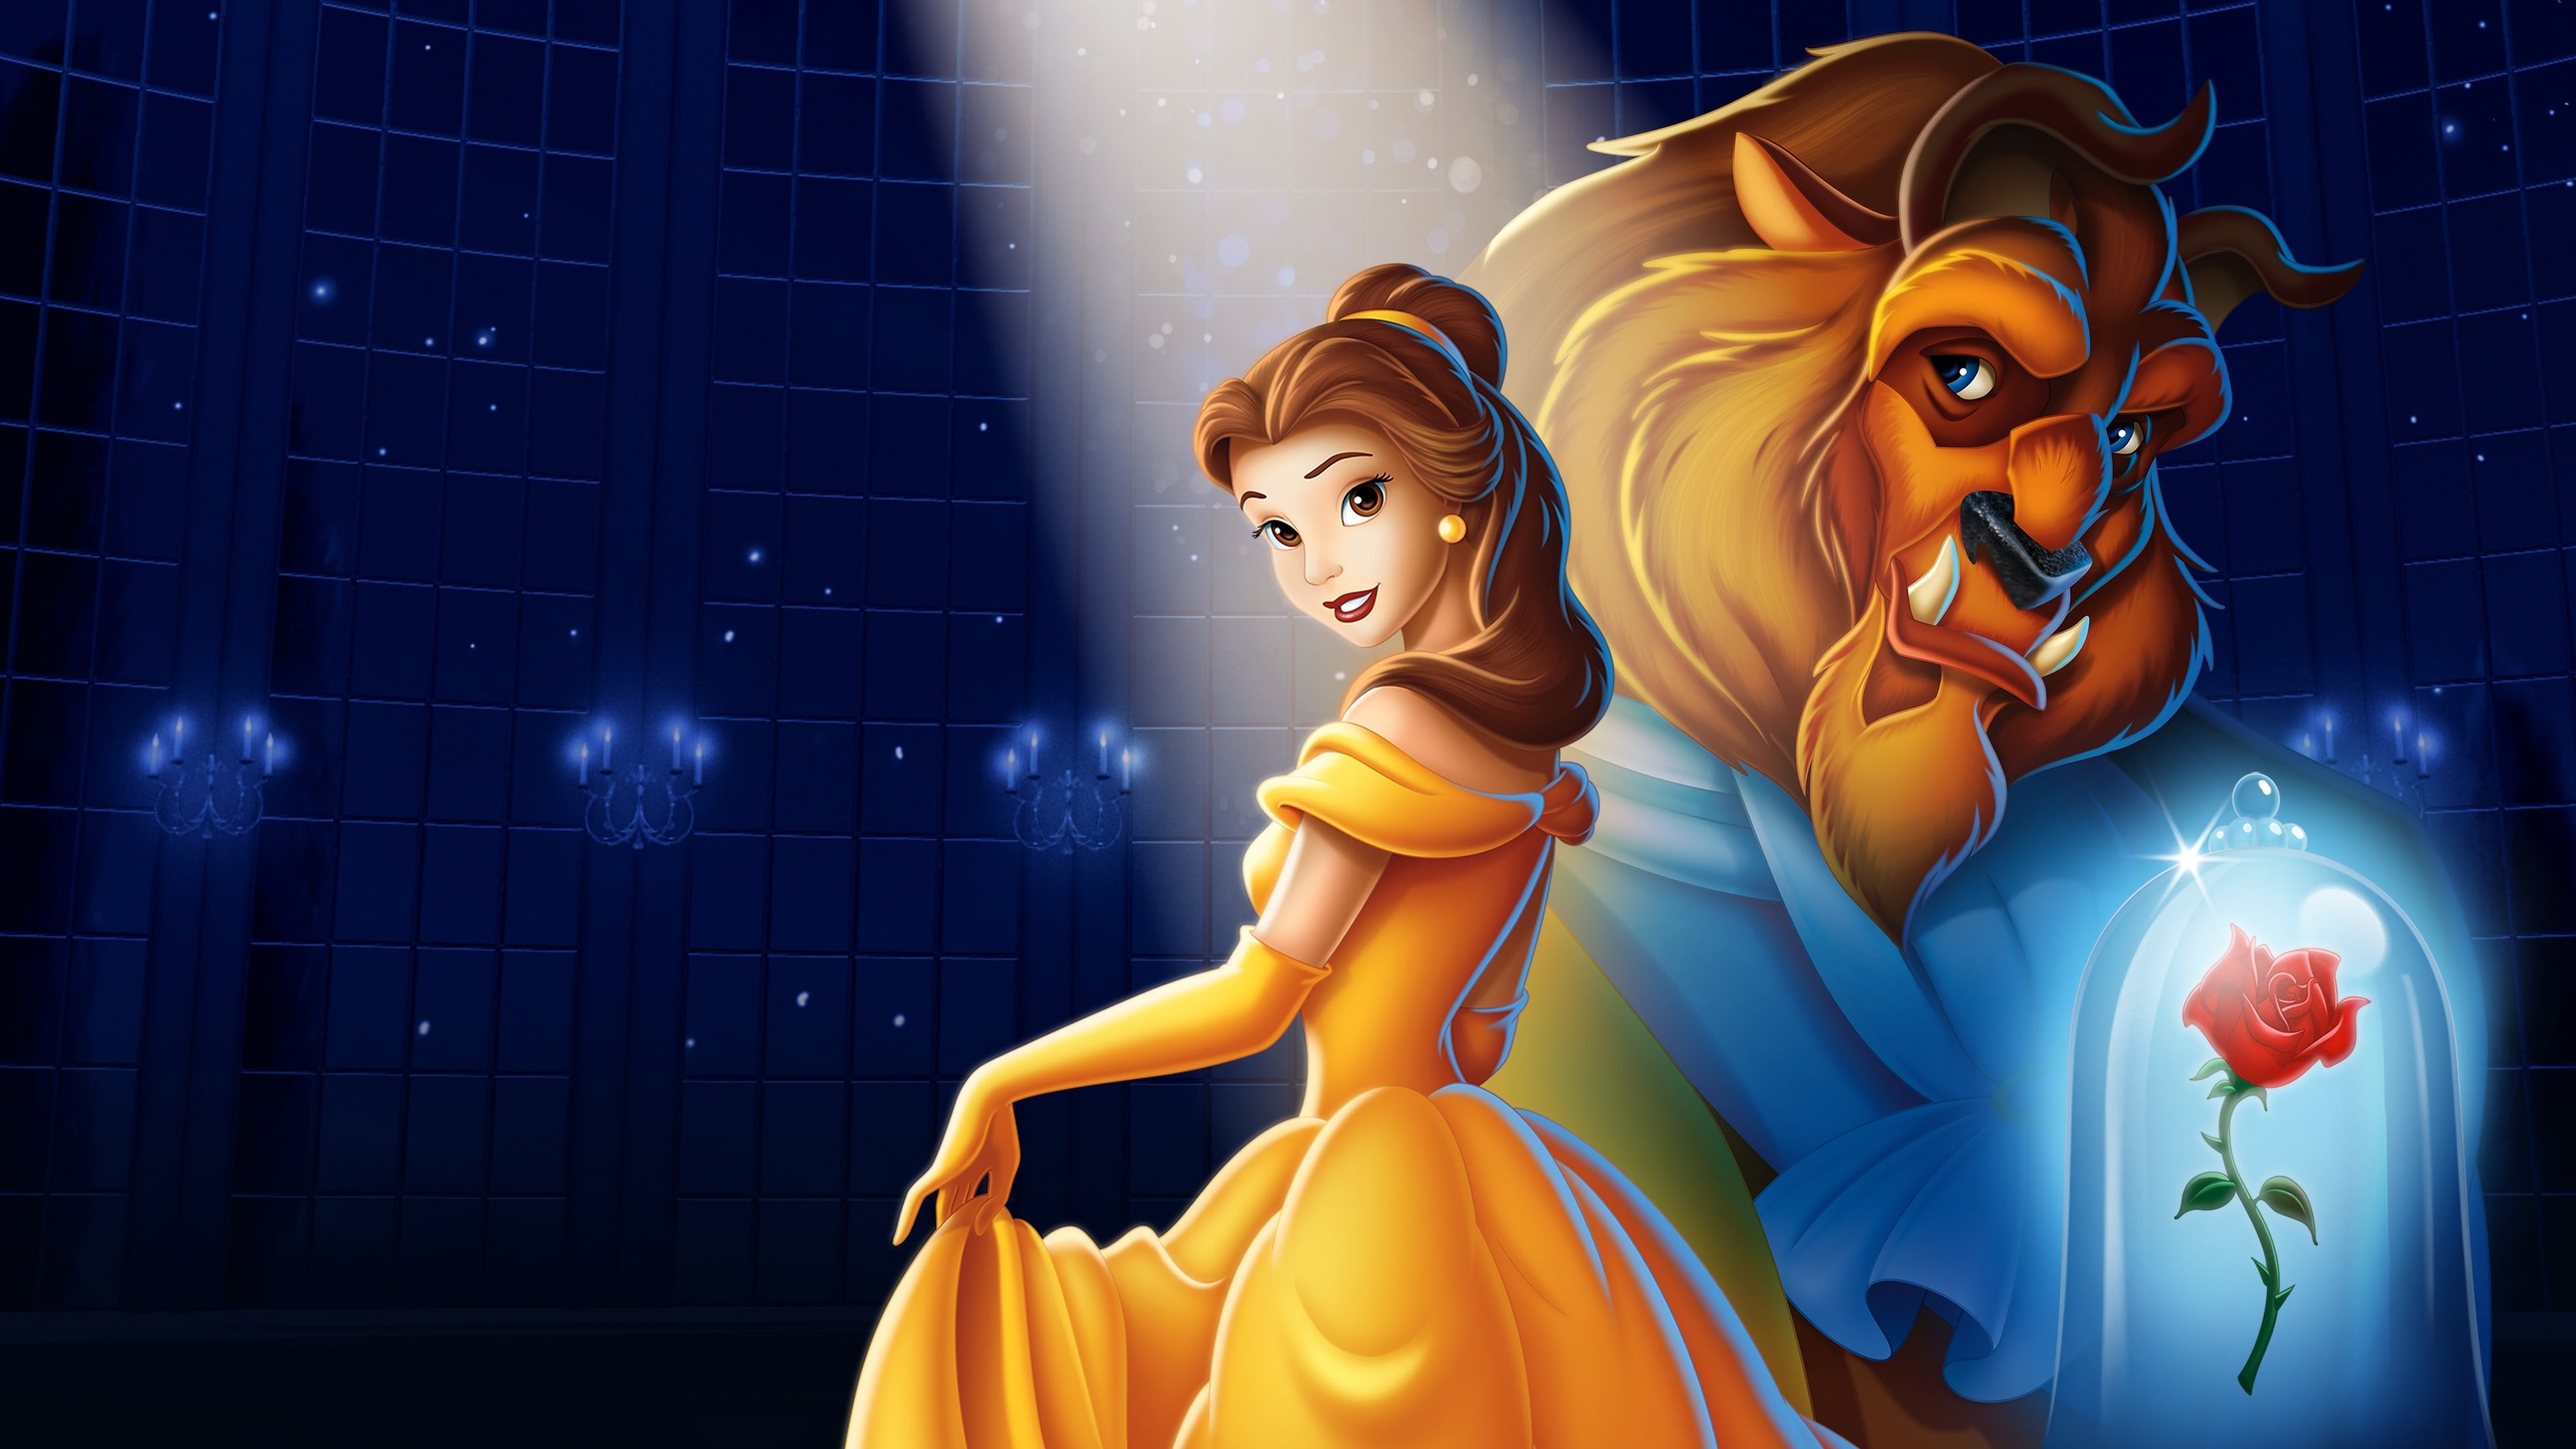 Belle HD Wallpapers and Backgrounds. 